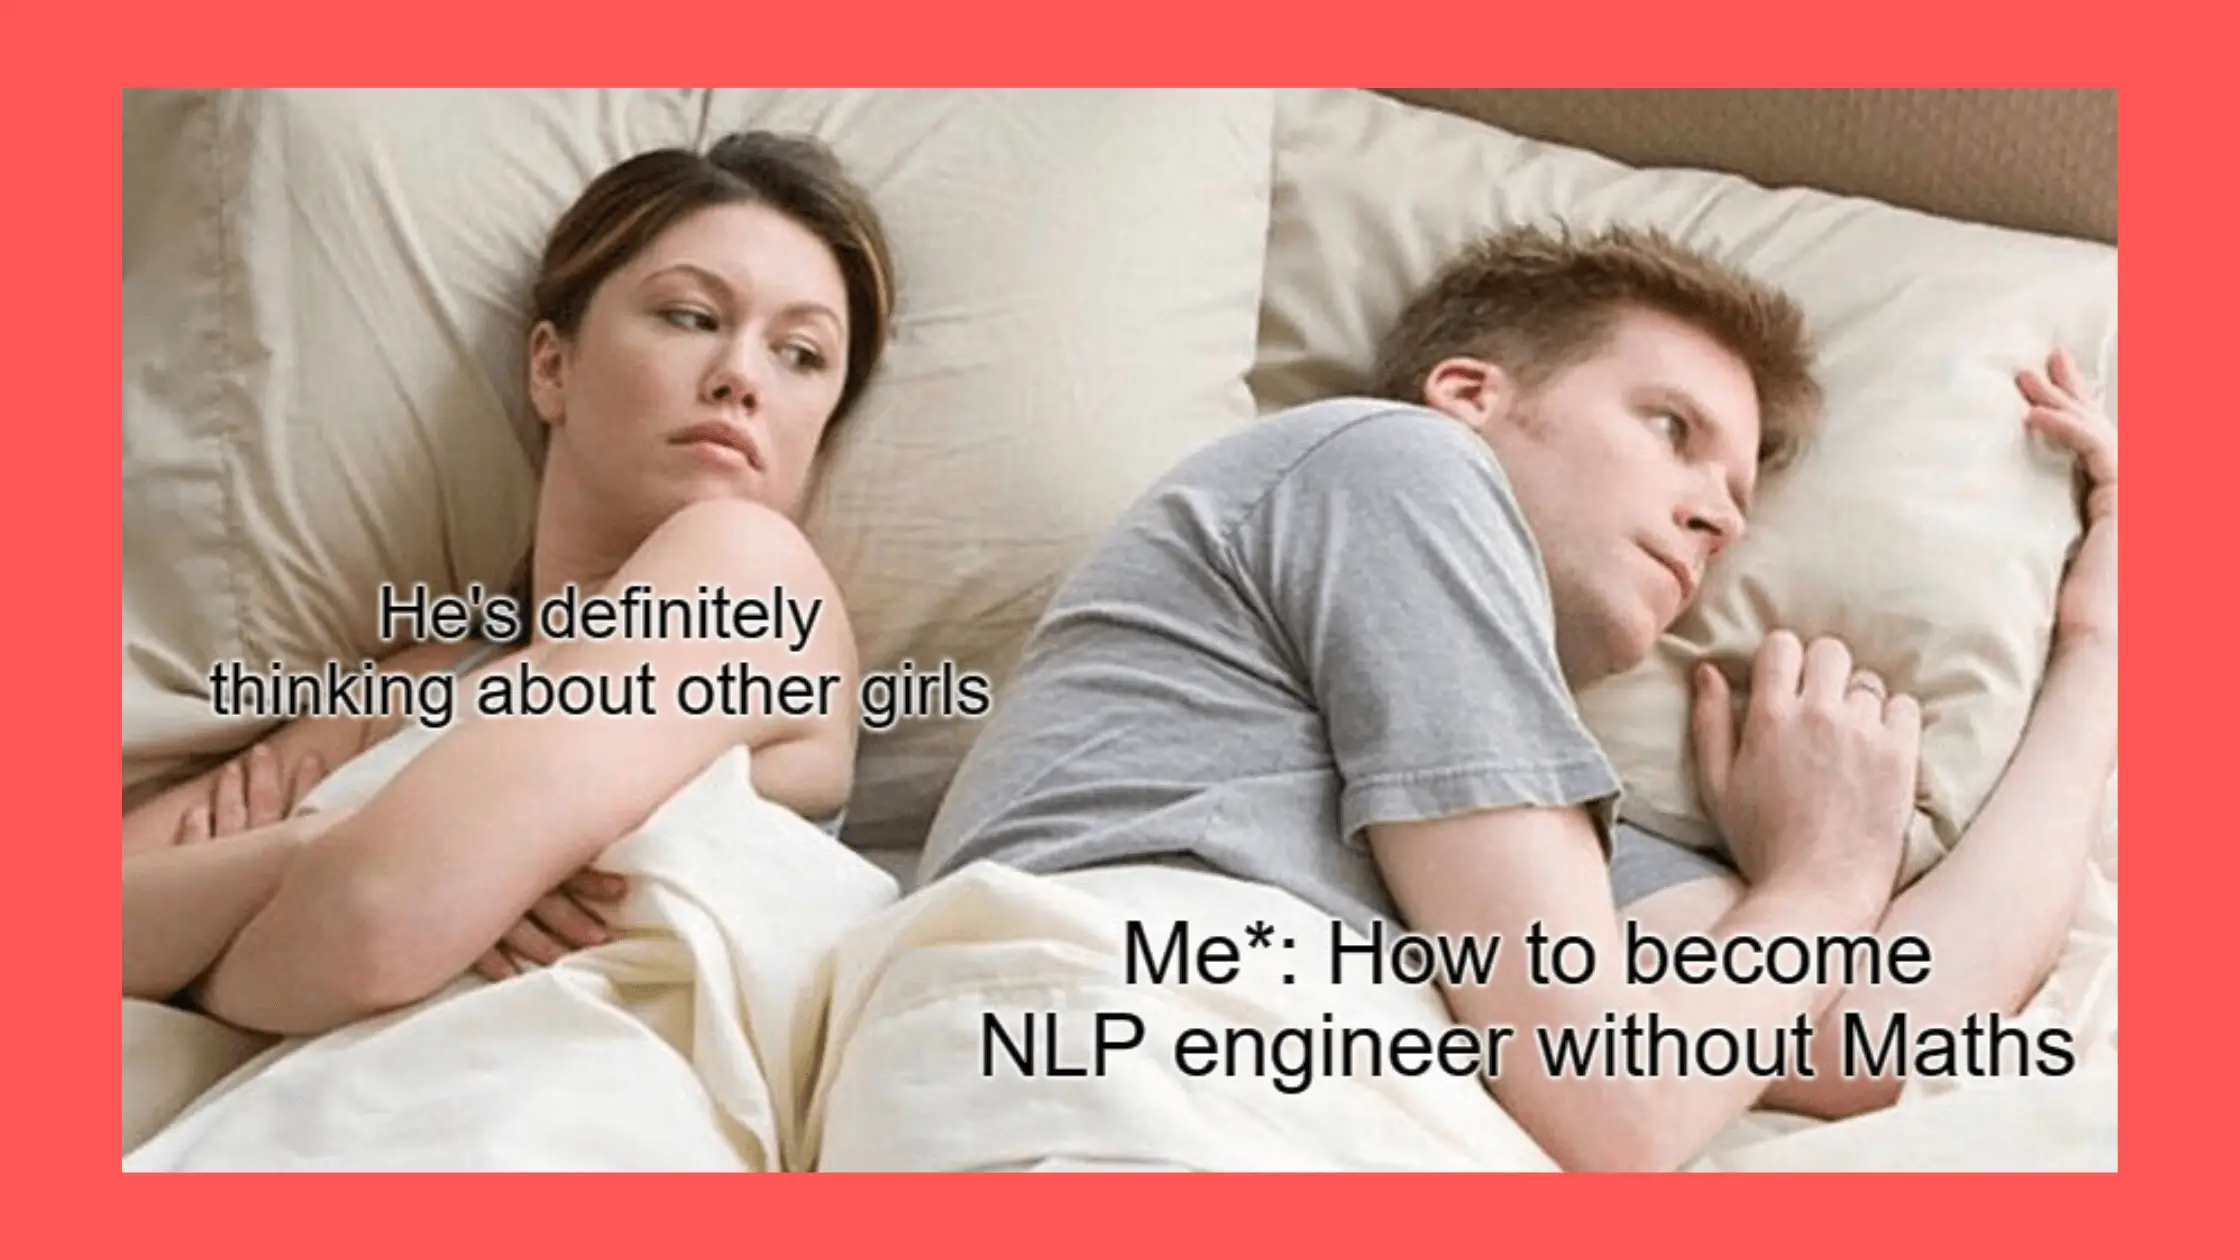 But What does an NLP engineer do?